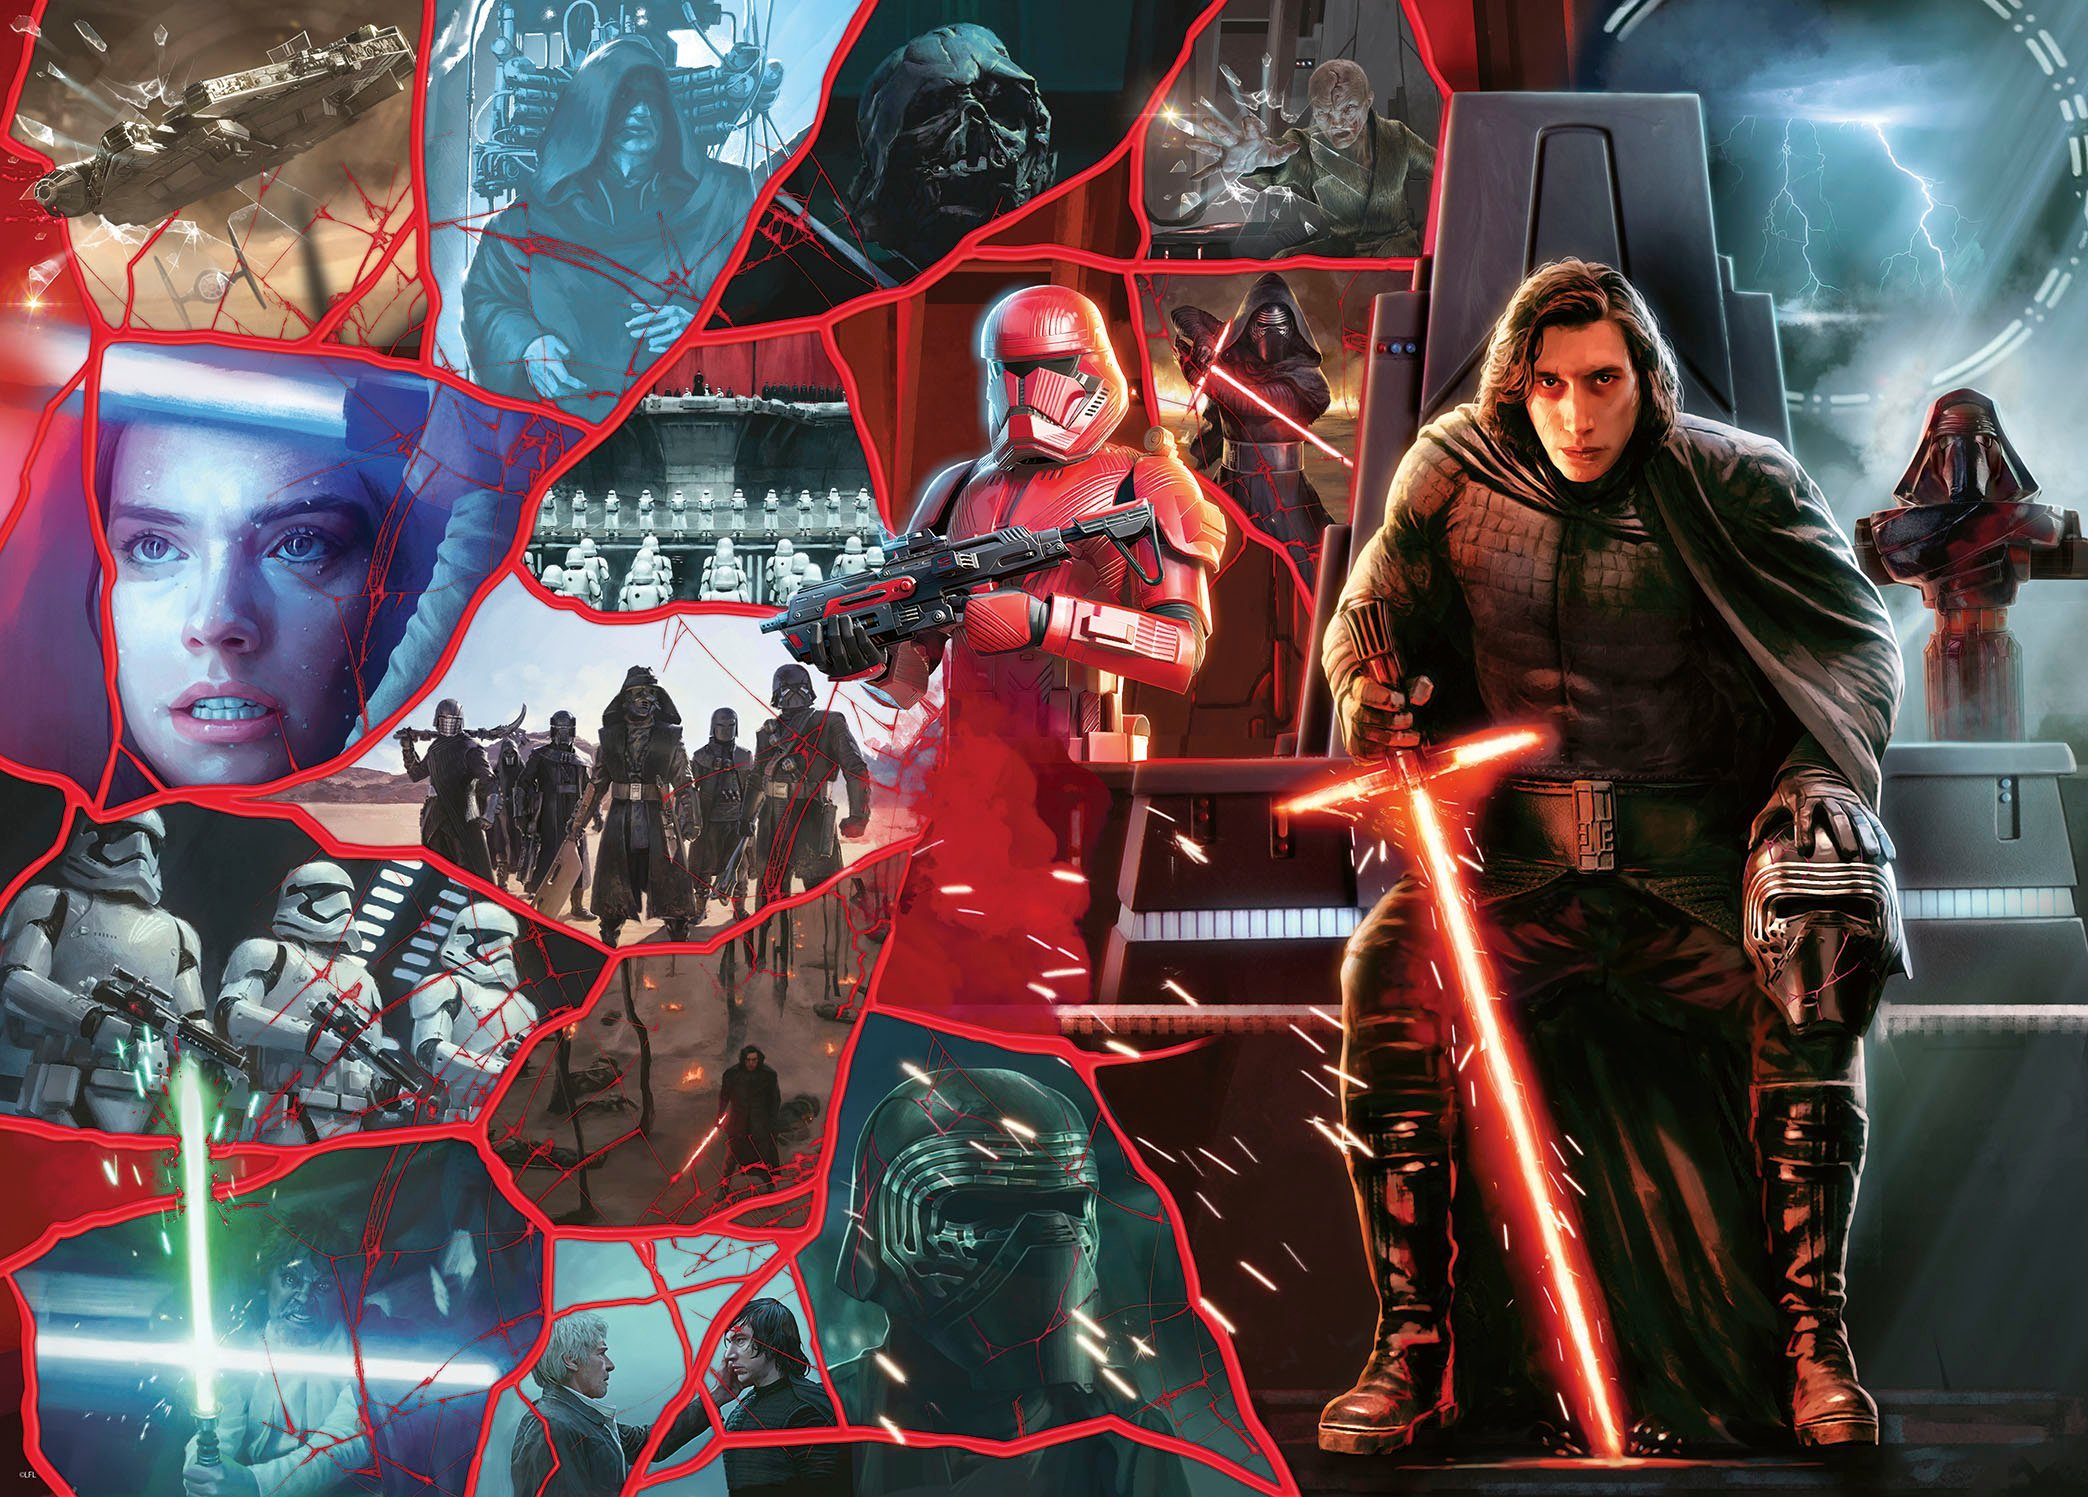 Ravensburger Puzzle Star Wars Villainous, Germany Kylo Ren, 1000 in Puzzleteile, Made